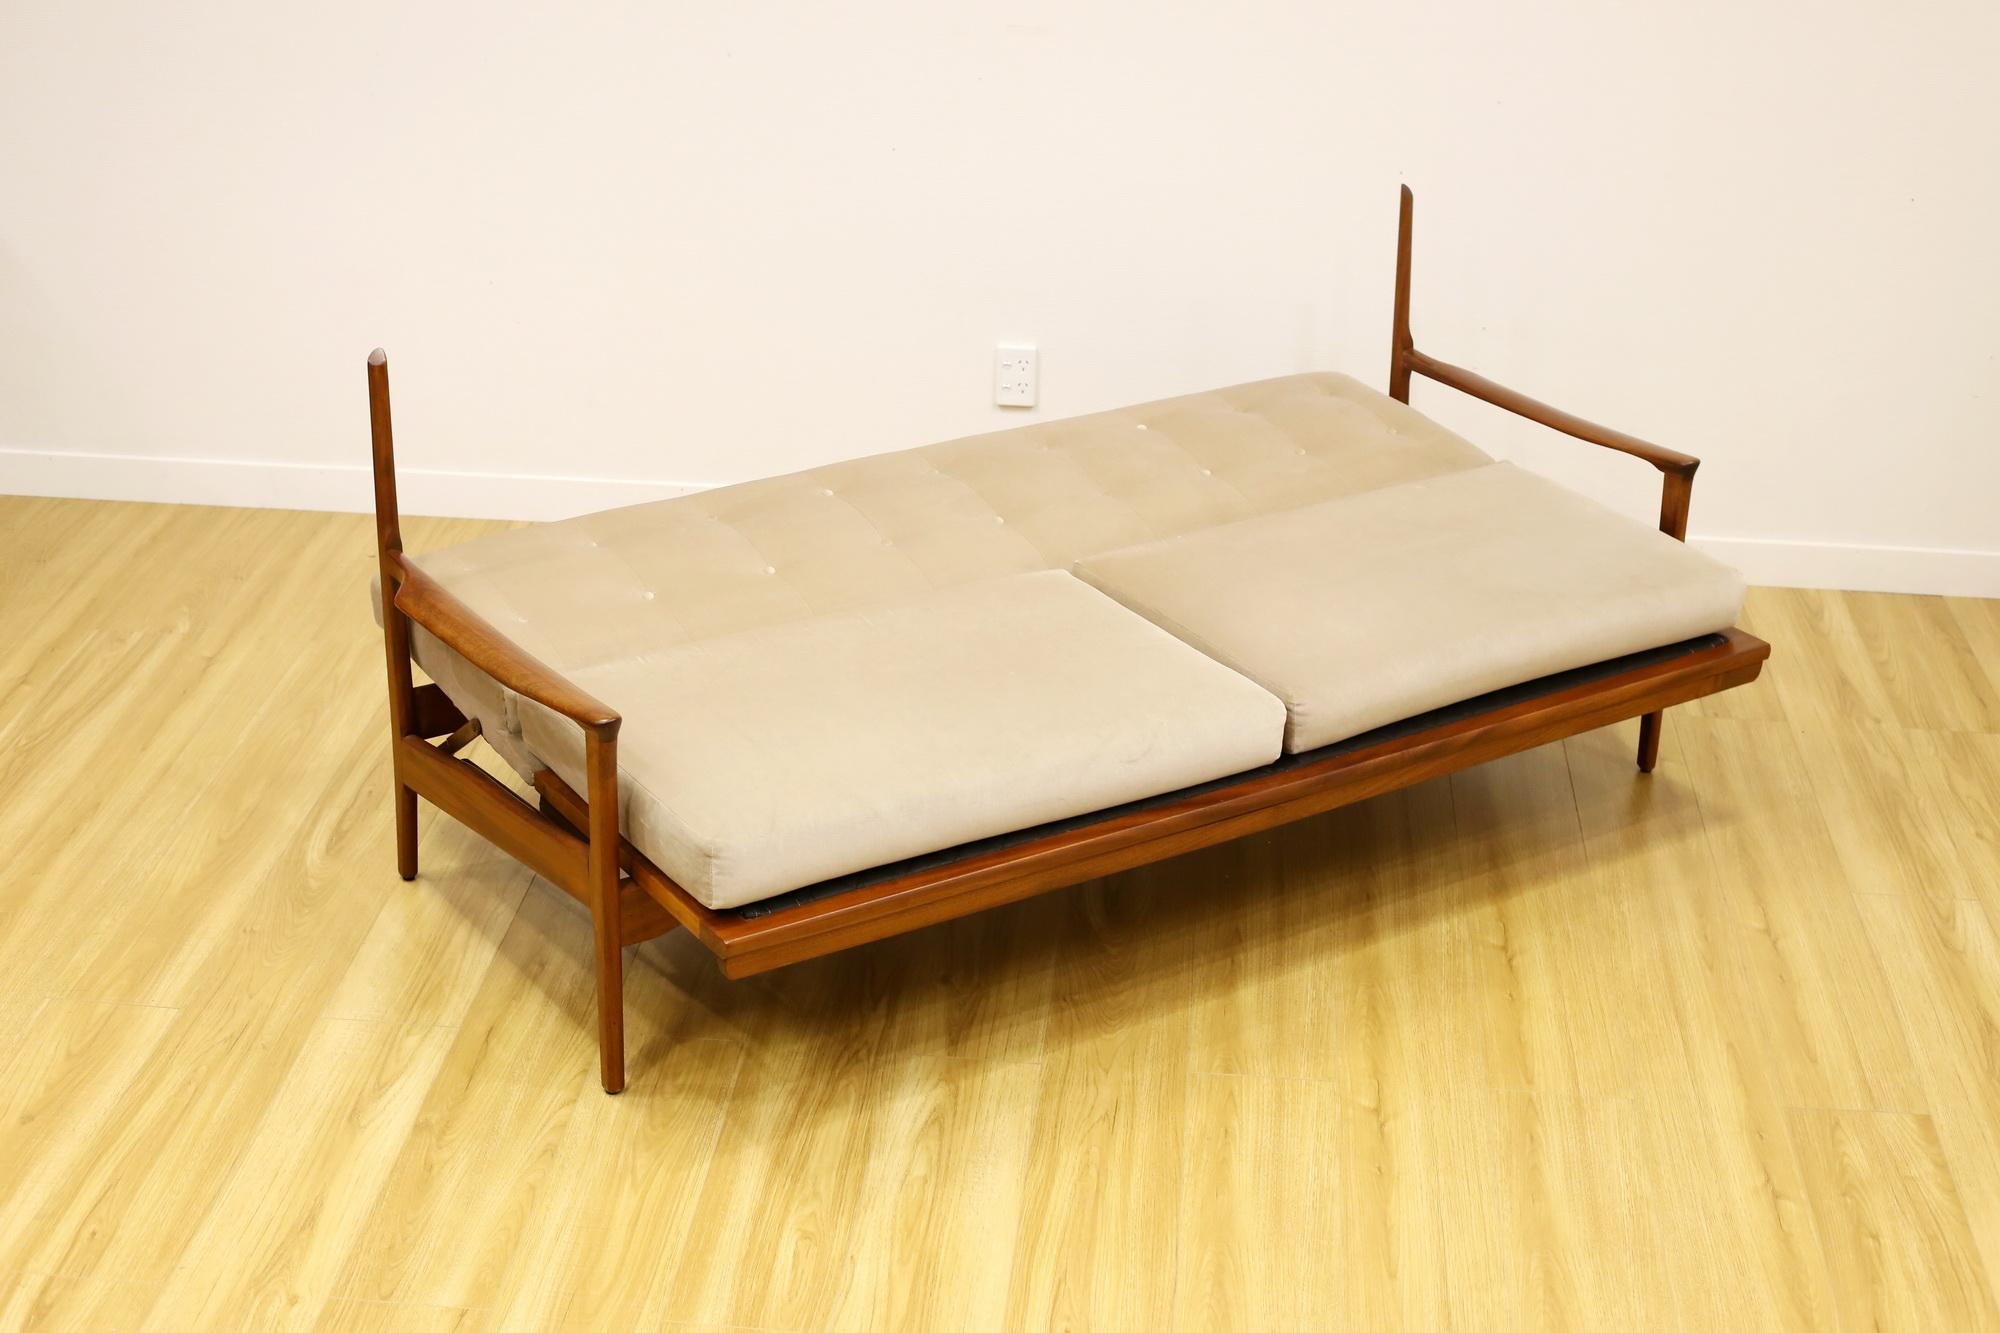 A rare daybed is a timeless design that will stand out in any contemporary setting.

Fler 'KARINGA' Daybed designed by FRED LOWEN.

In good original condition. 

[Matching armchairs in my other listings.]

Beautifully sculpted mahogany frame is